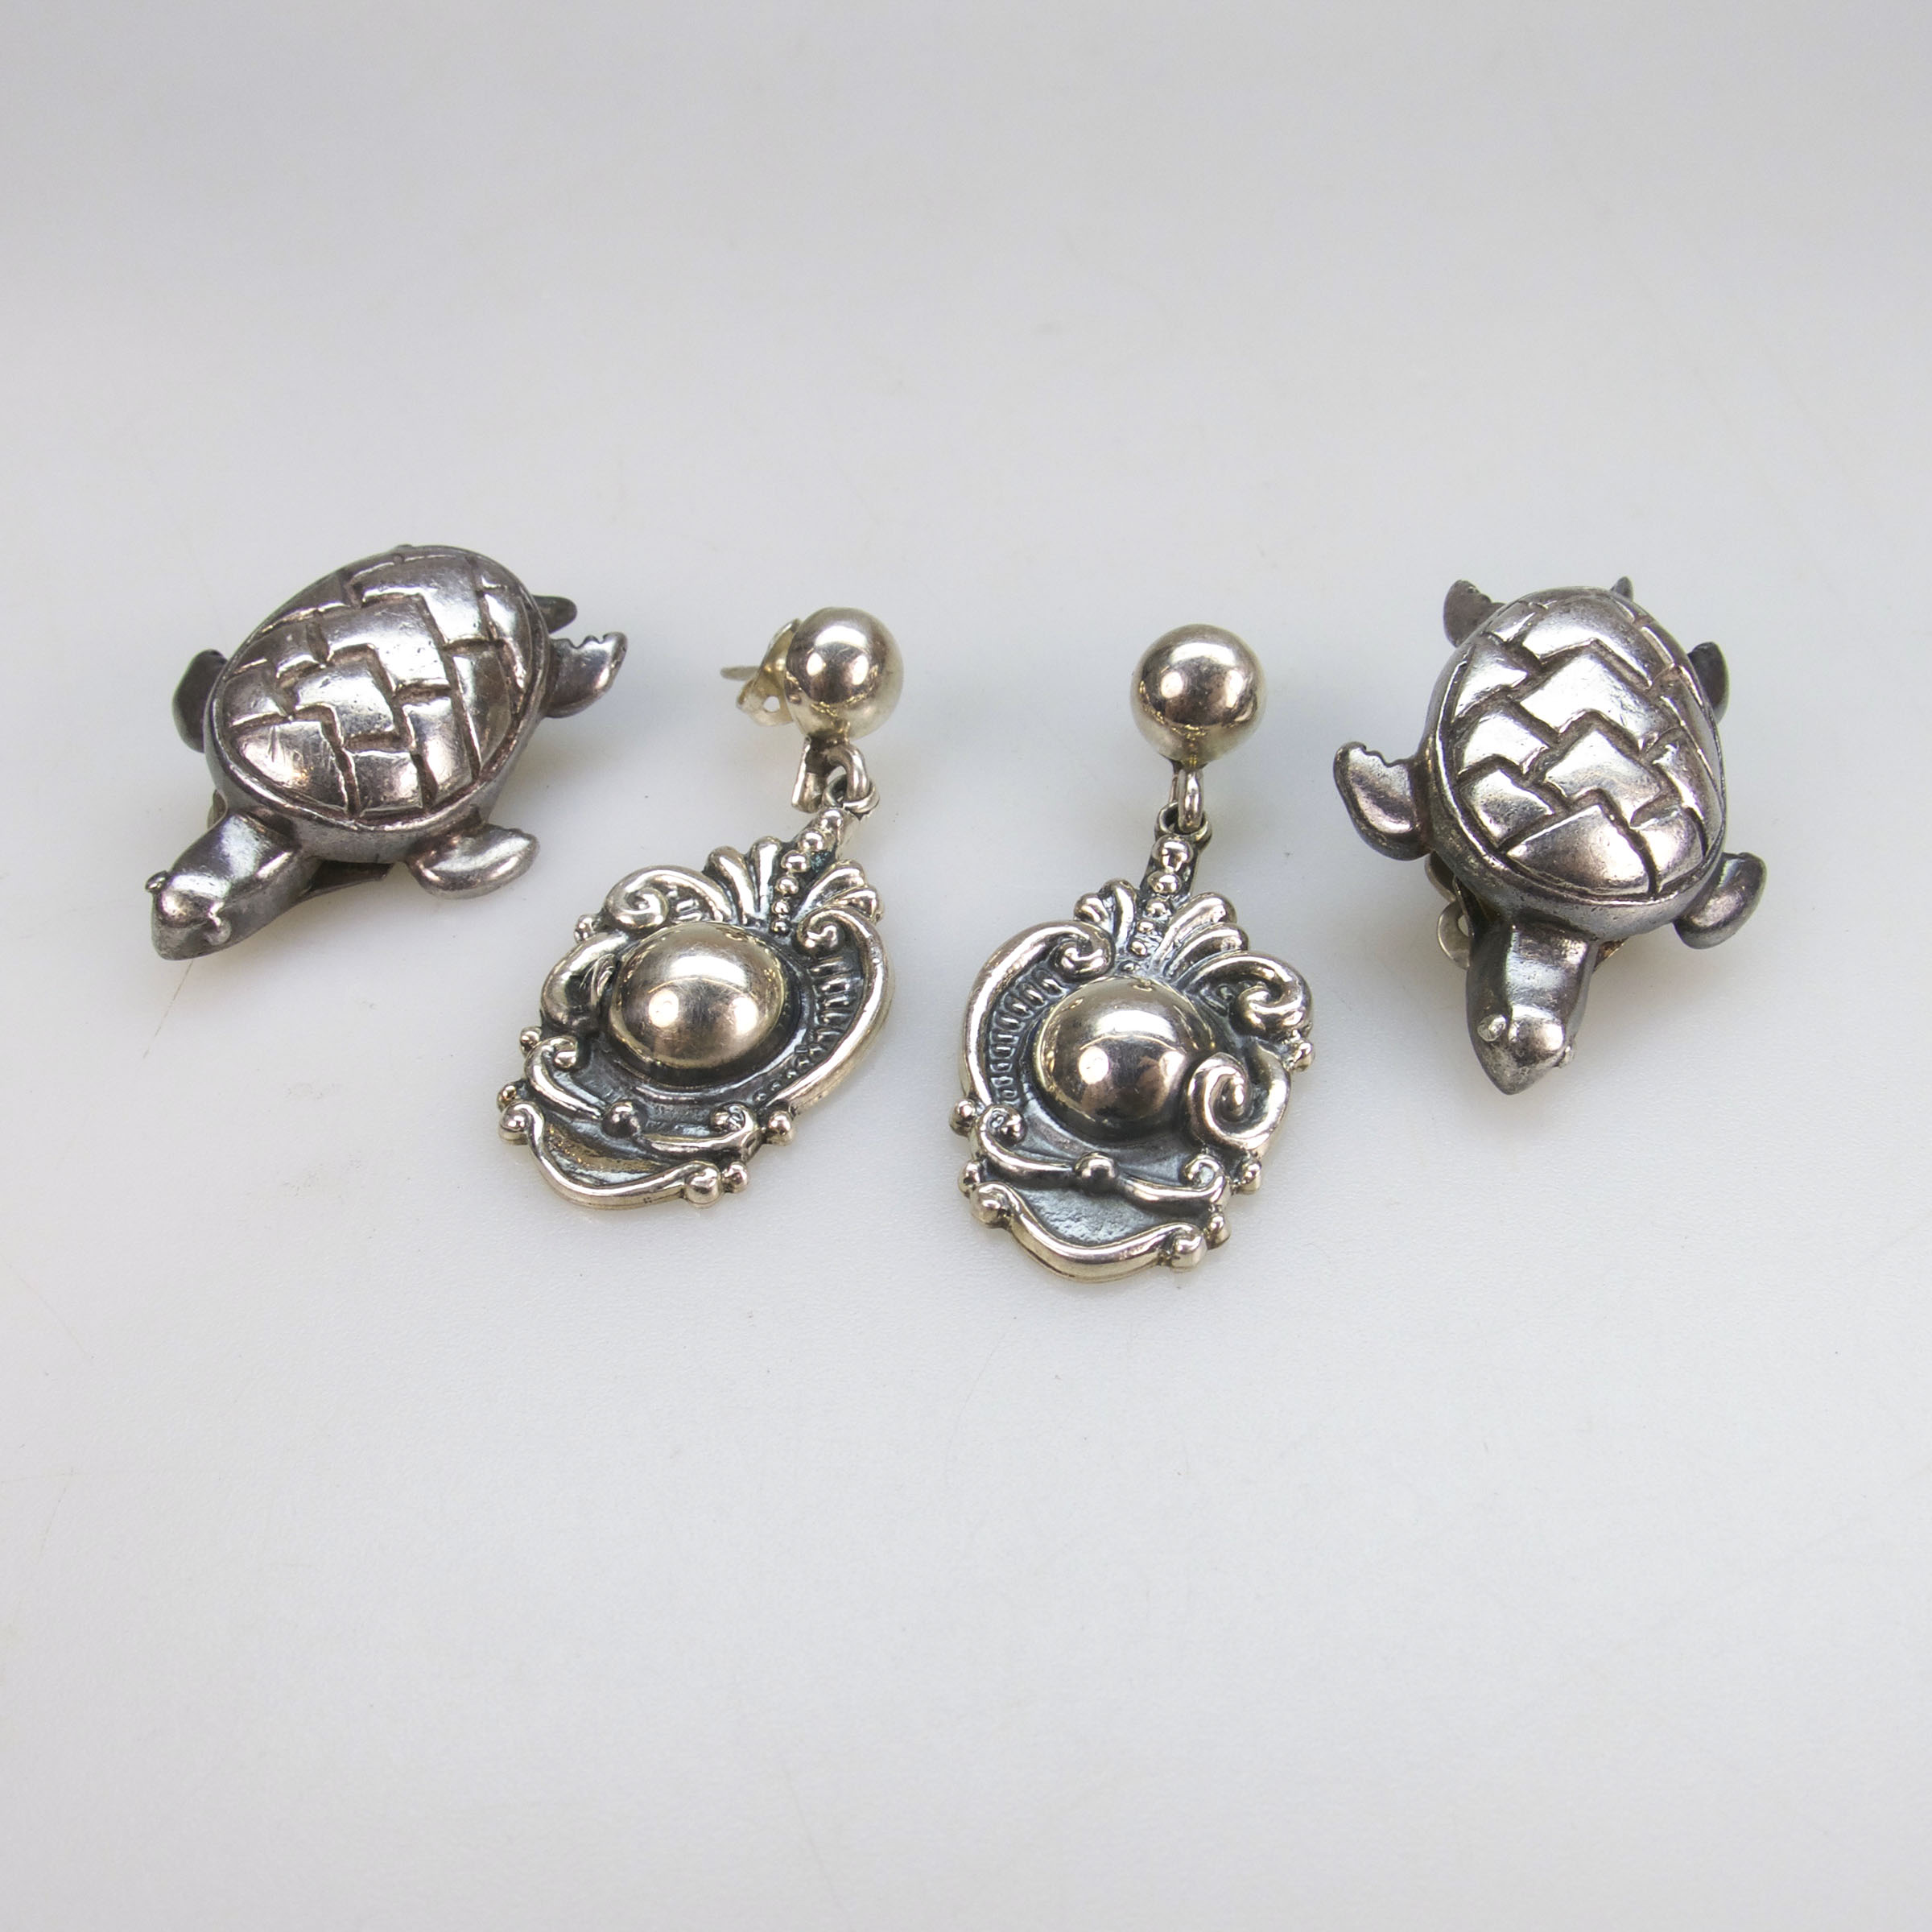 Two Pairs Of Mexican 950 Grade Silver Earrings